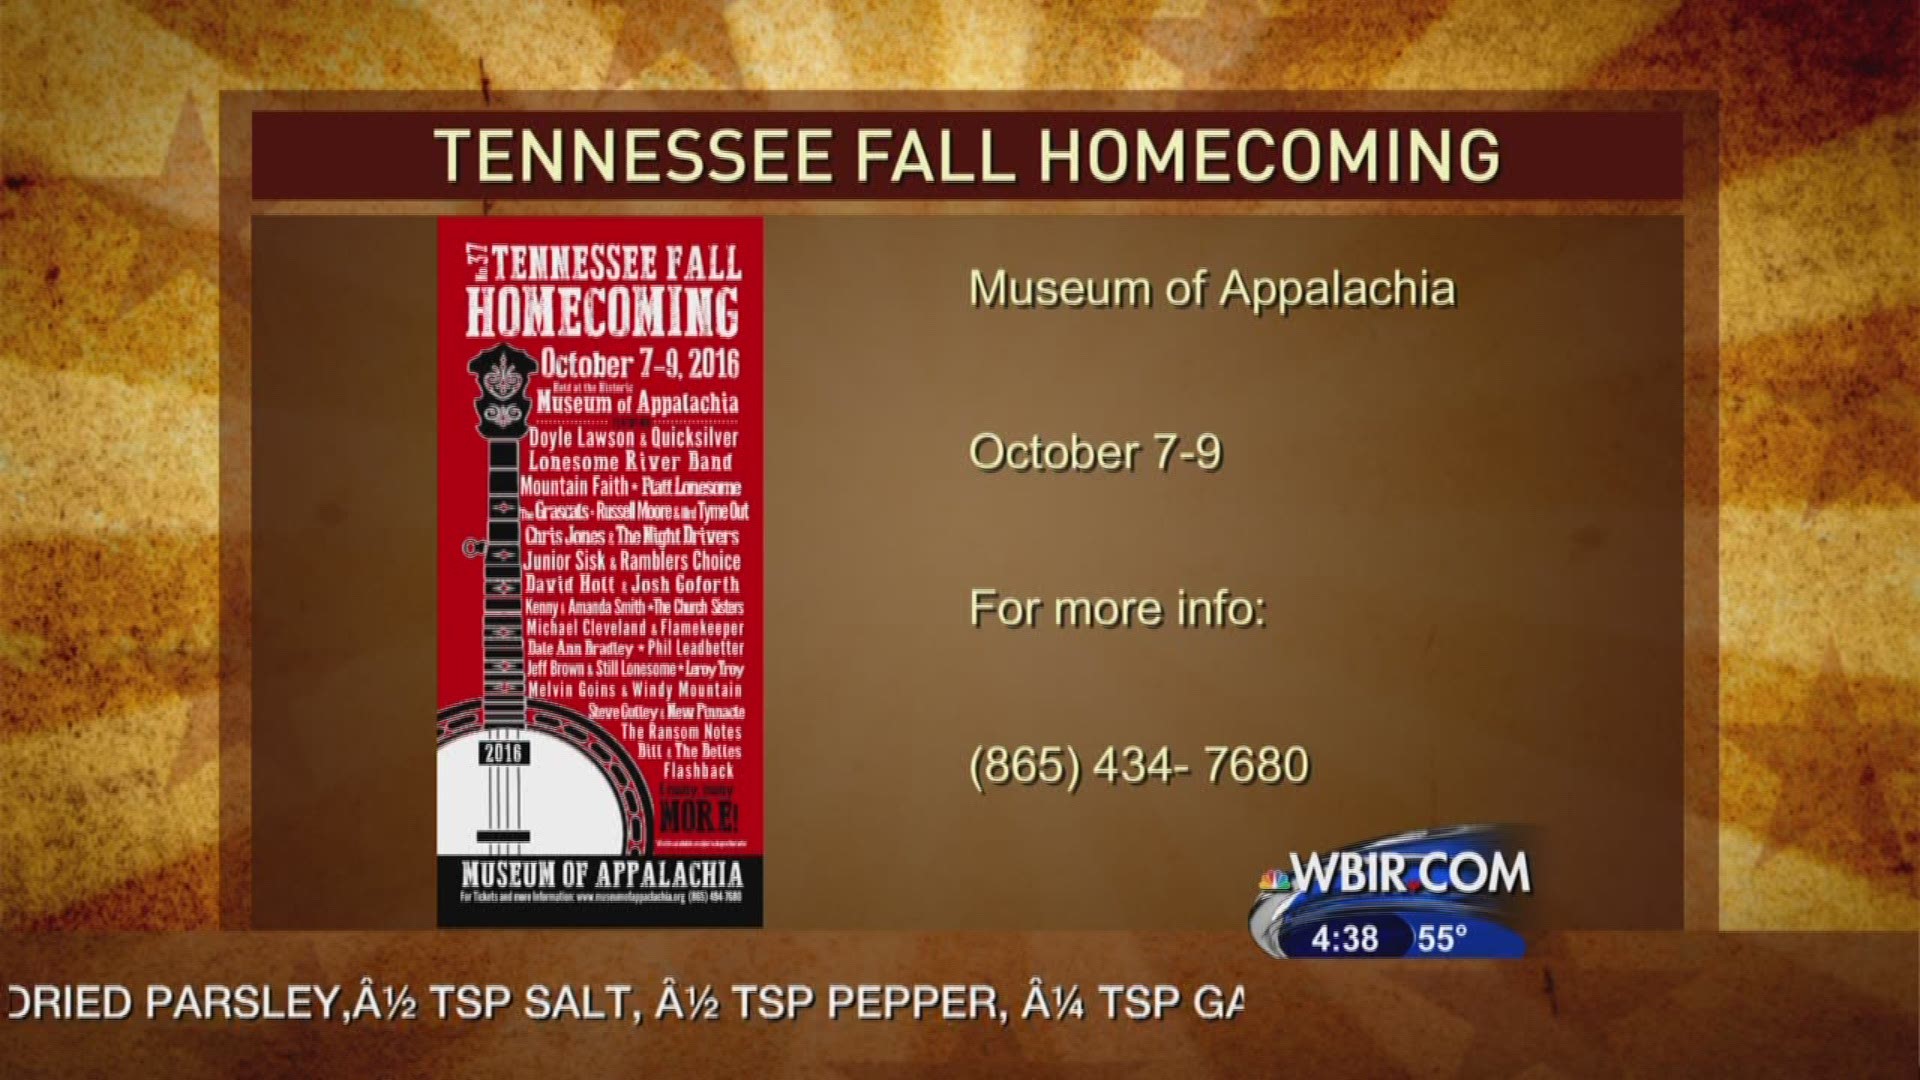 John Meyer from the Museum of Appalachia joins us with more on the annual event happening in October.